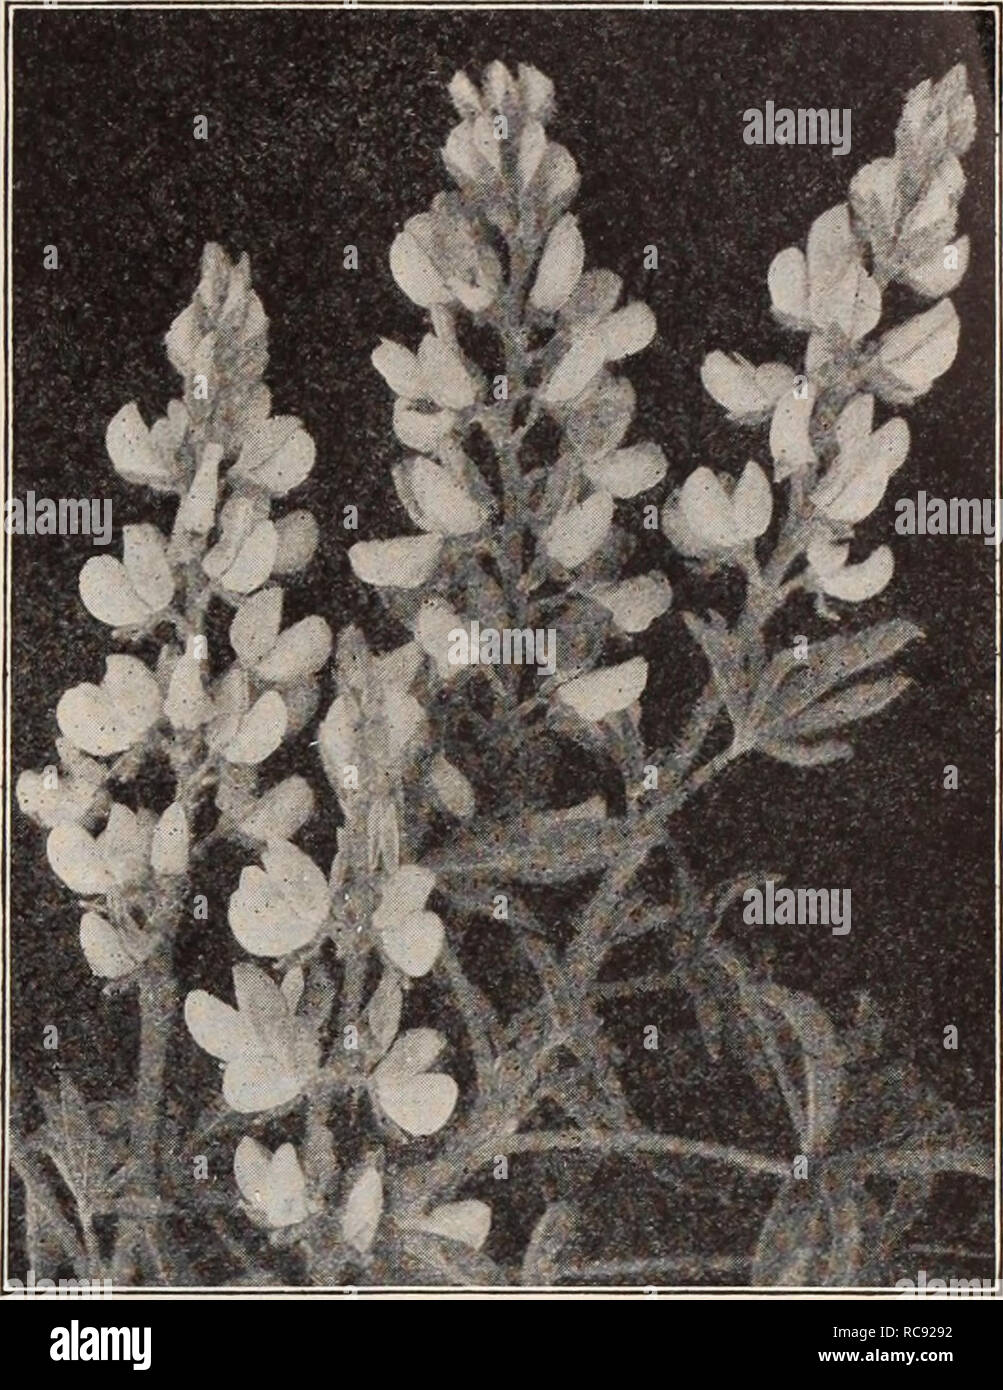 . Dreer's garden book / Henry A. Dreer.. Nursery Catalogue. Lilium Philippinense FoRMOSVNim. Lupinus (Lupine) Liliums 2987 Philippinense Formosanum. A truly remarkable lily, with umbels of large white long trumpet shaped flowers, like an Easter Lily (see cut). Will bloom in 6 to 8 months from the time seeds are sown; very fragrant. 2 to 3 feet. 25 cts. per pkt.; Special pkt., $1.25. 2988 Regale. One of the most beautiful Garden Lilies. Grows 3 to 5 feet high, blooms outdoors in July. Large trumpet shaped flowers; color ivory-white, shaded pink tinged with canary yellow at base of petals. 15 ct Stock Photo